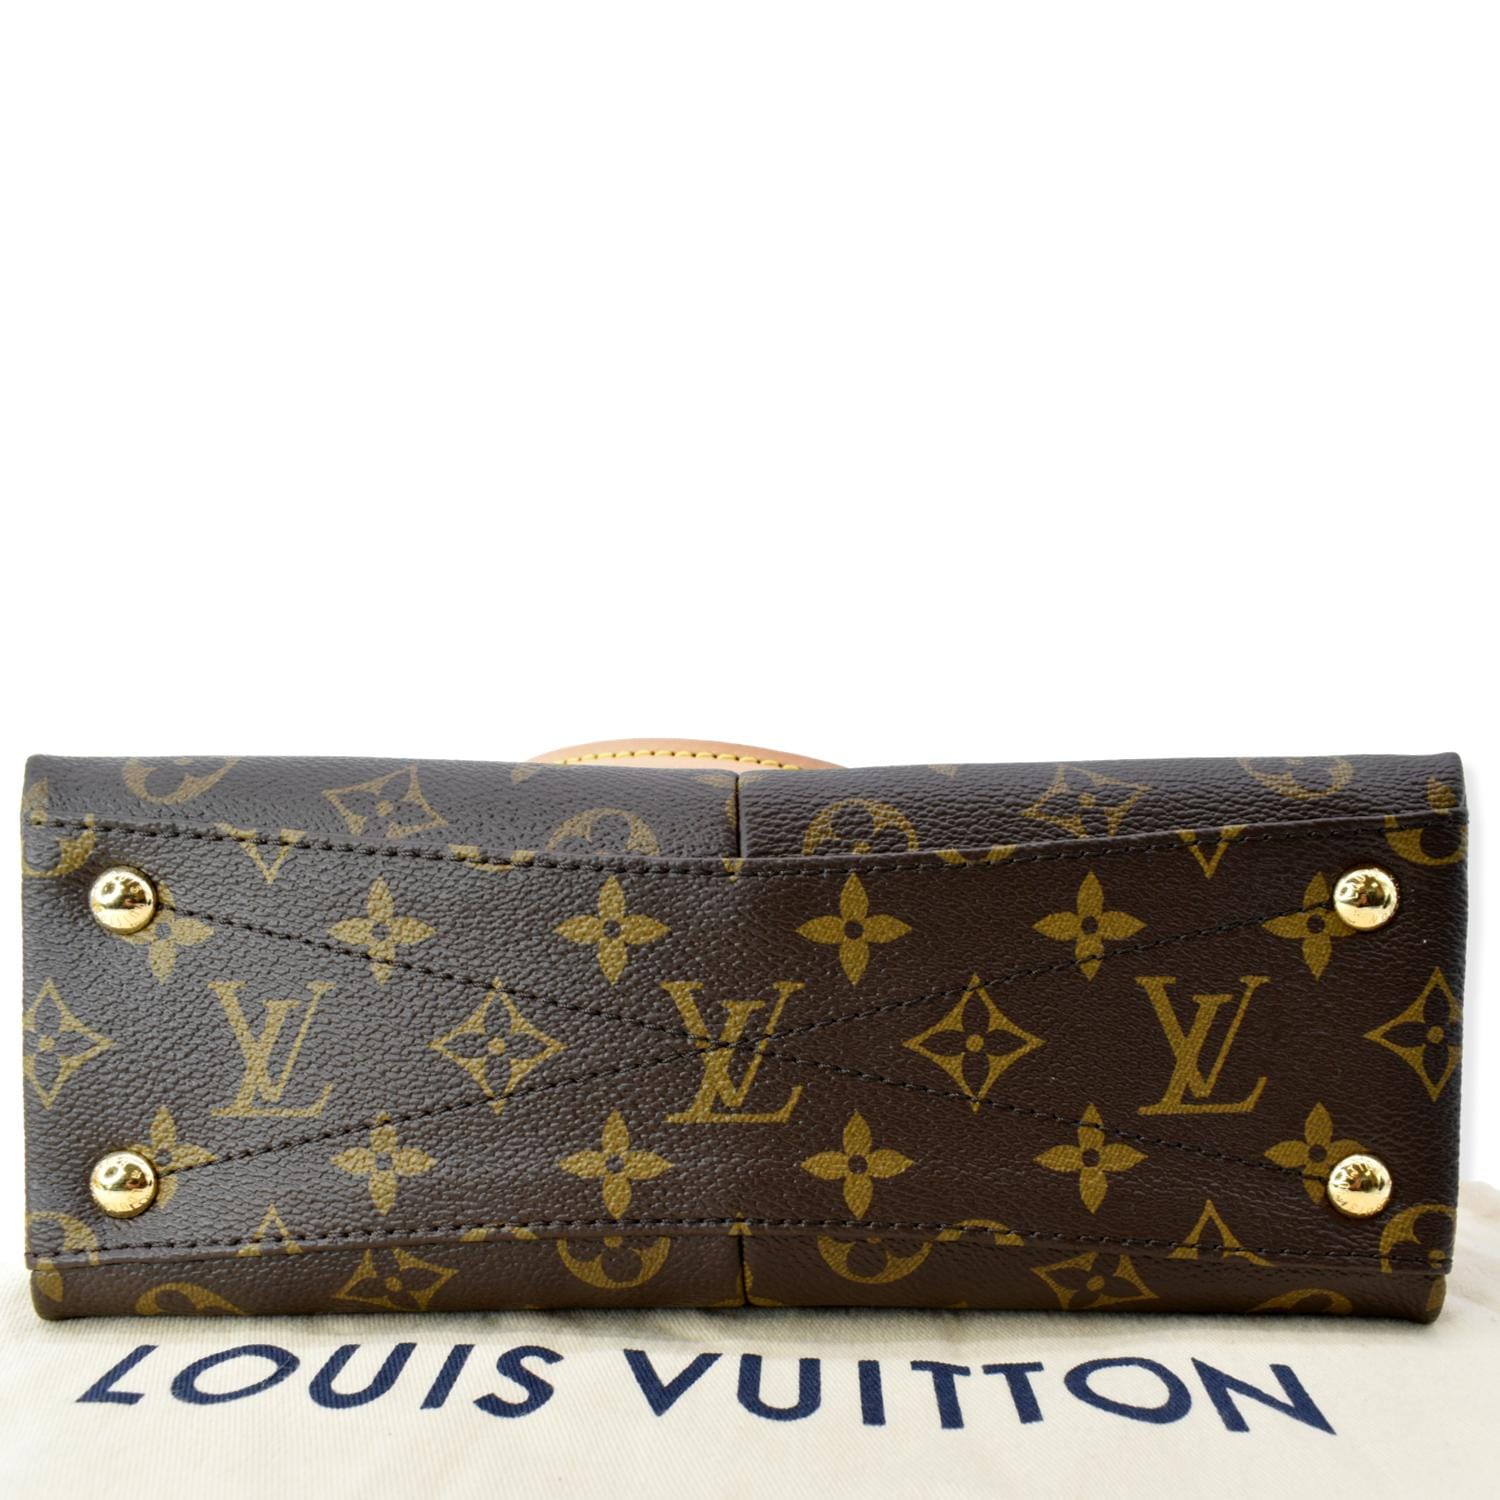 Preowned Authentic Louis Vuitton Monogram V Tote BB Rose Poudre